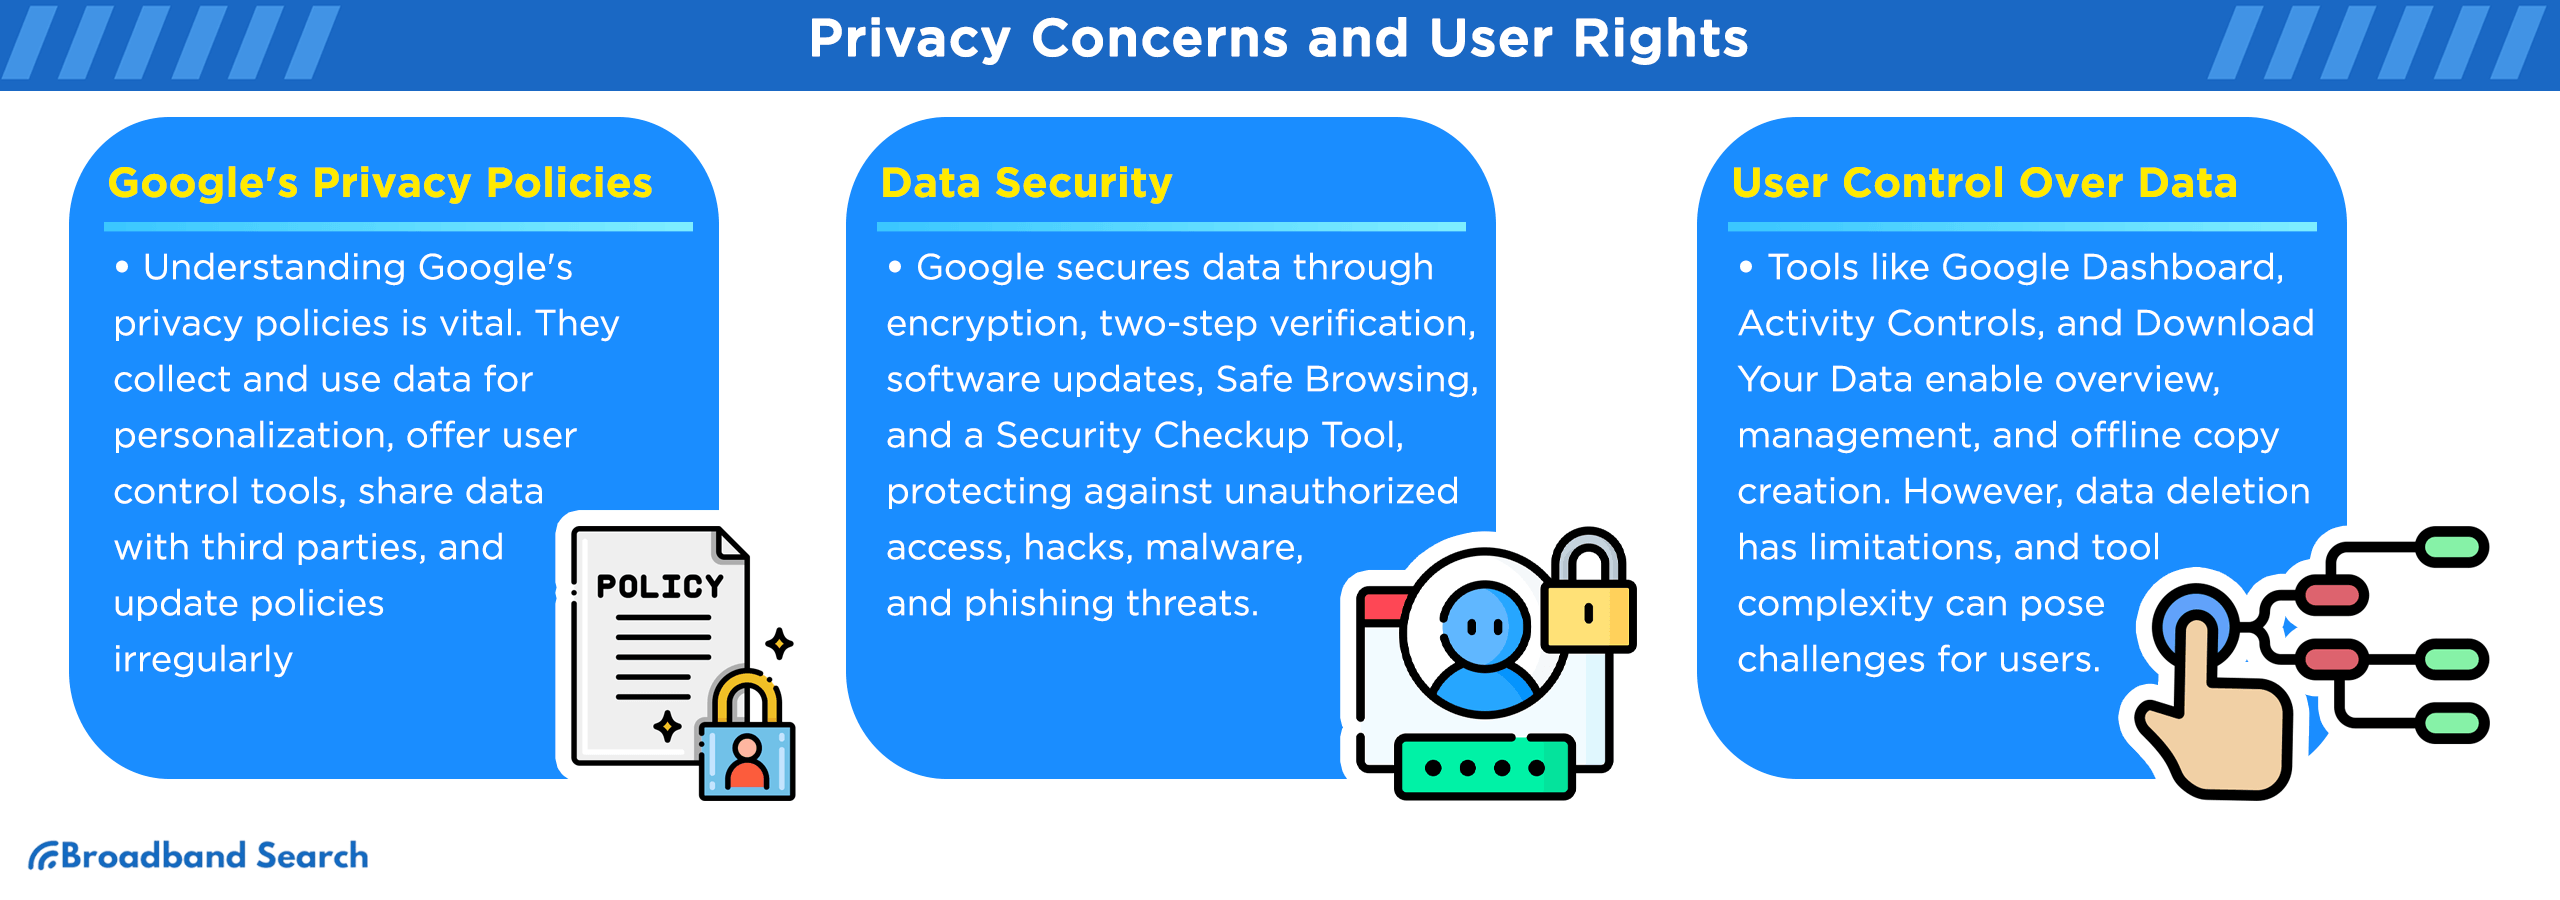 privacy concerns and user rights